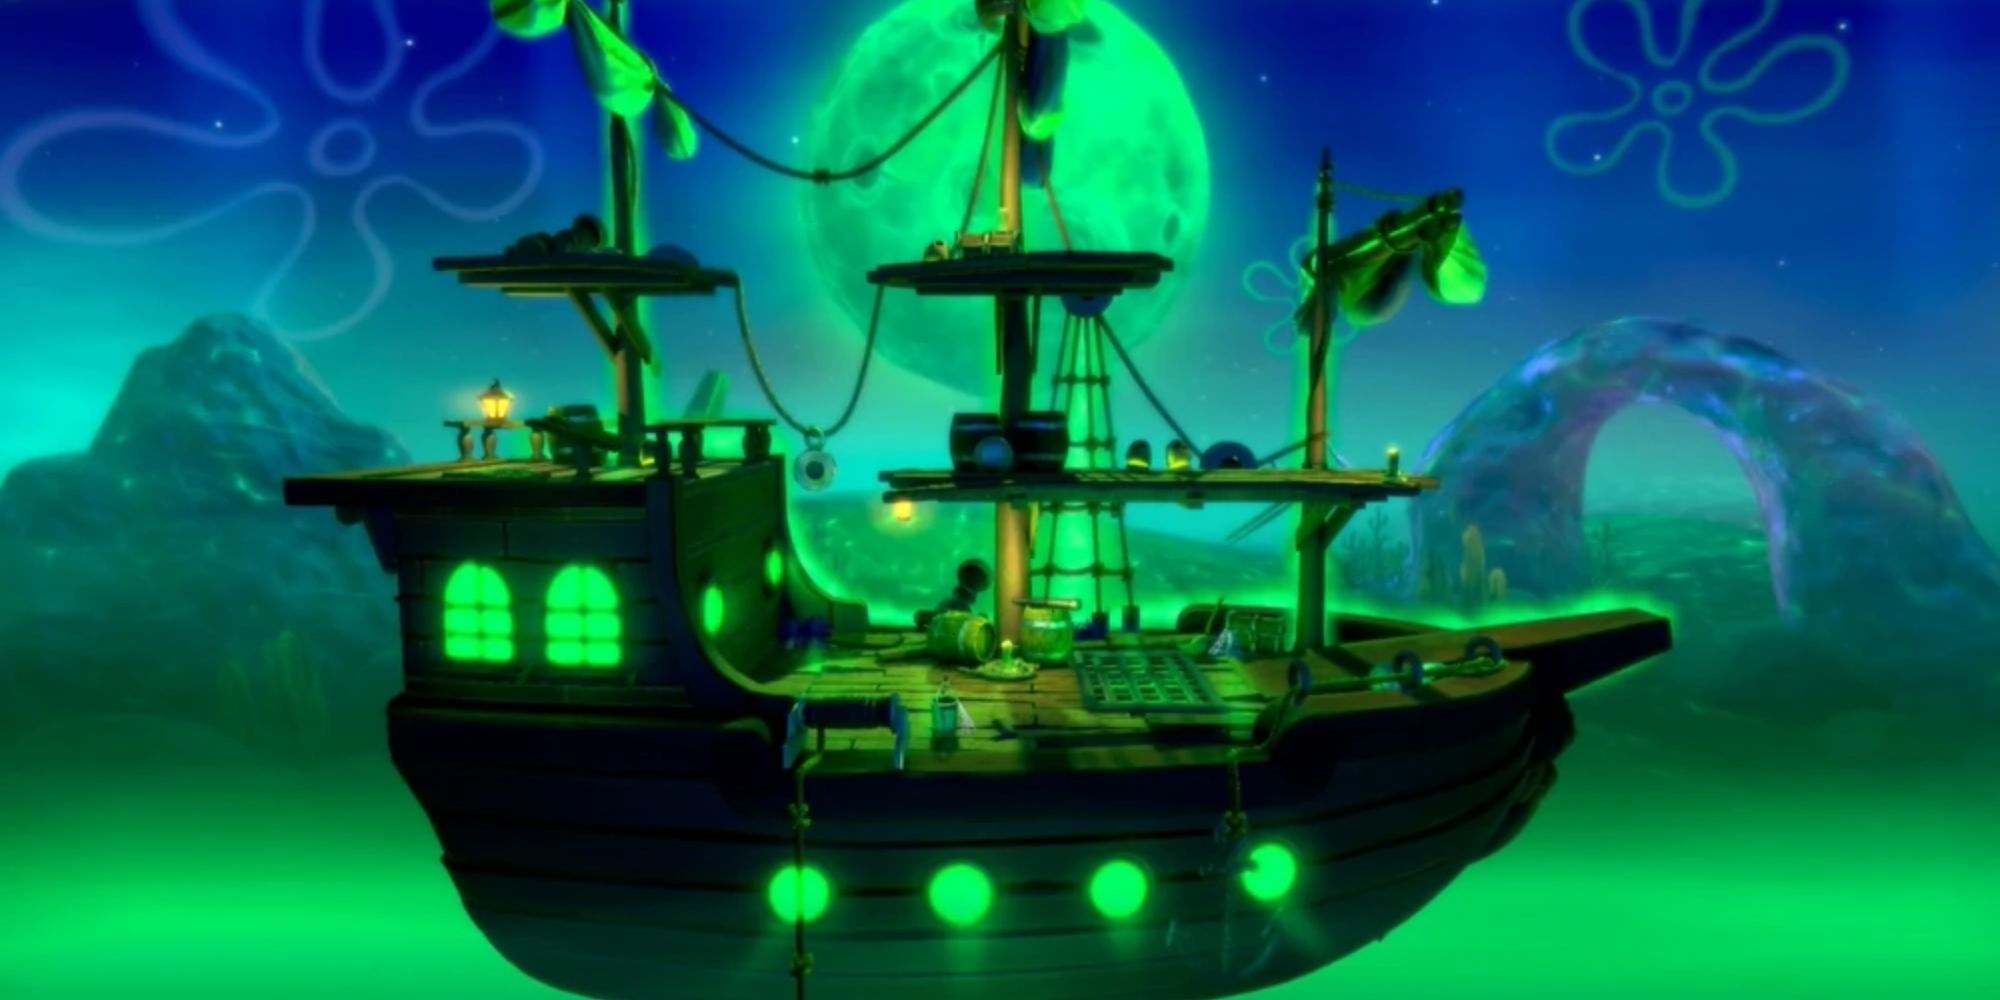 The Flying Dutchmans Ship sails past a full moon